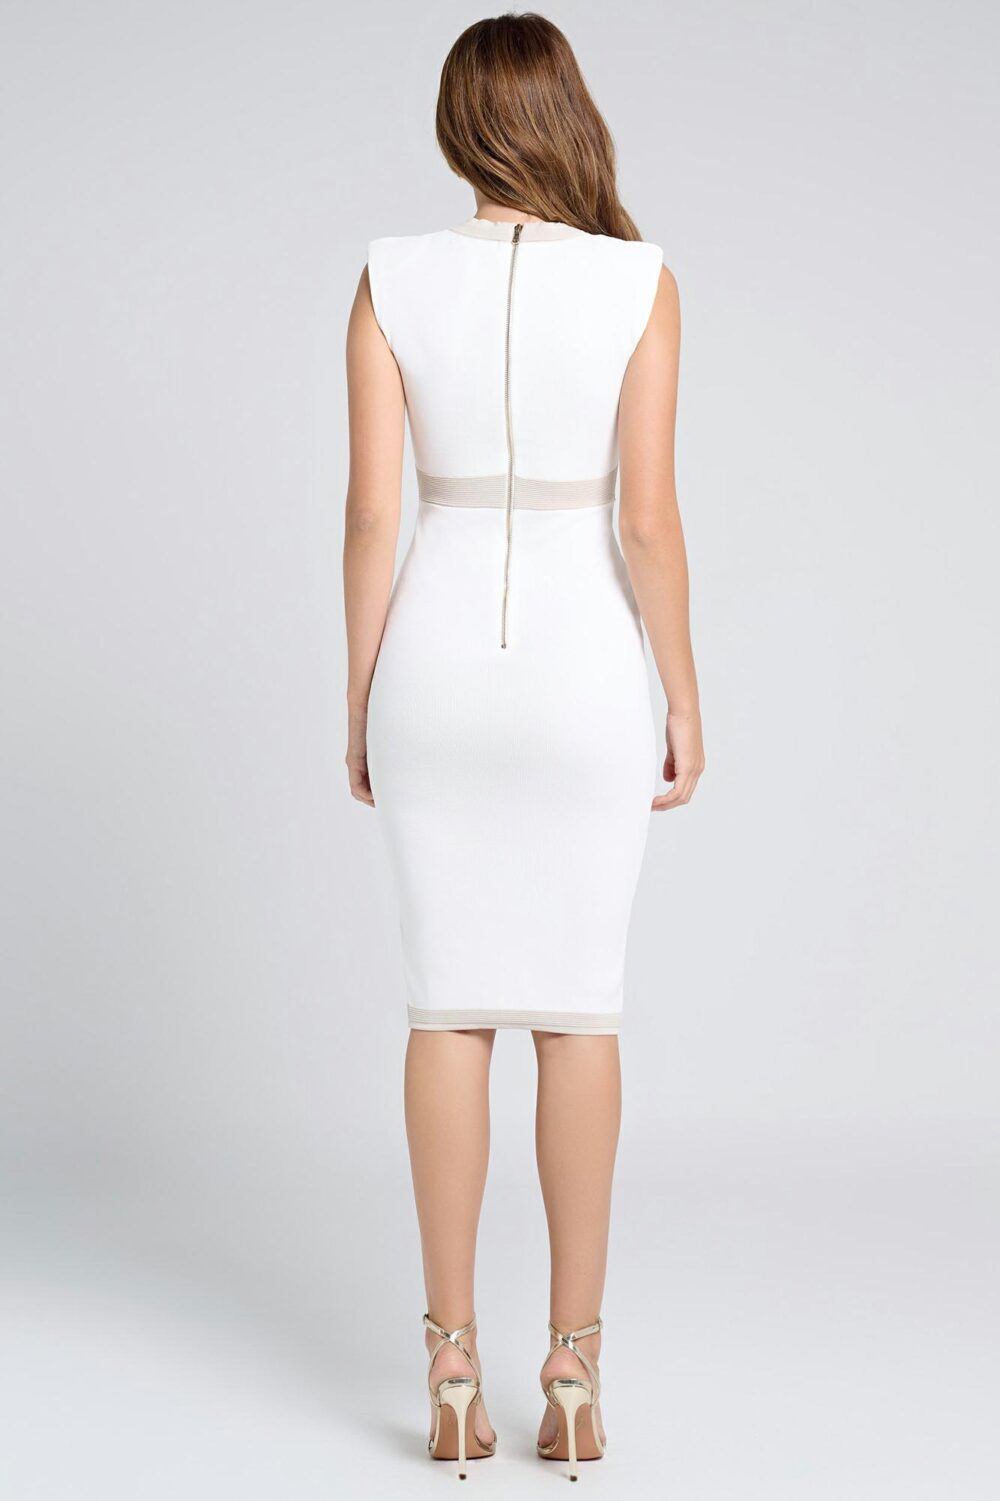 Ladies Dress Colour is White/nude Contrast